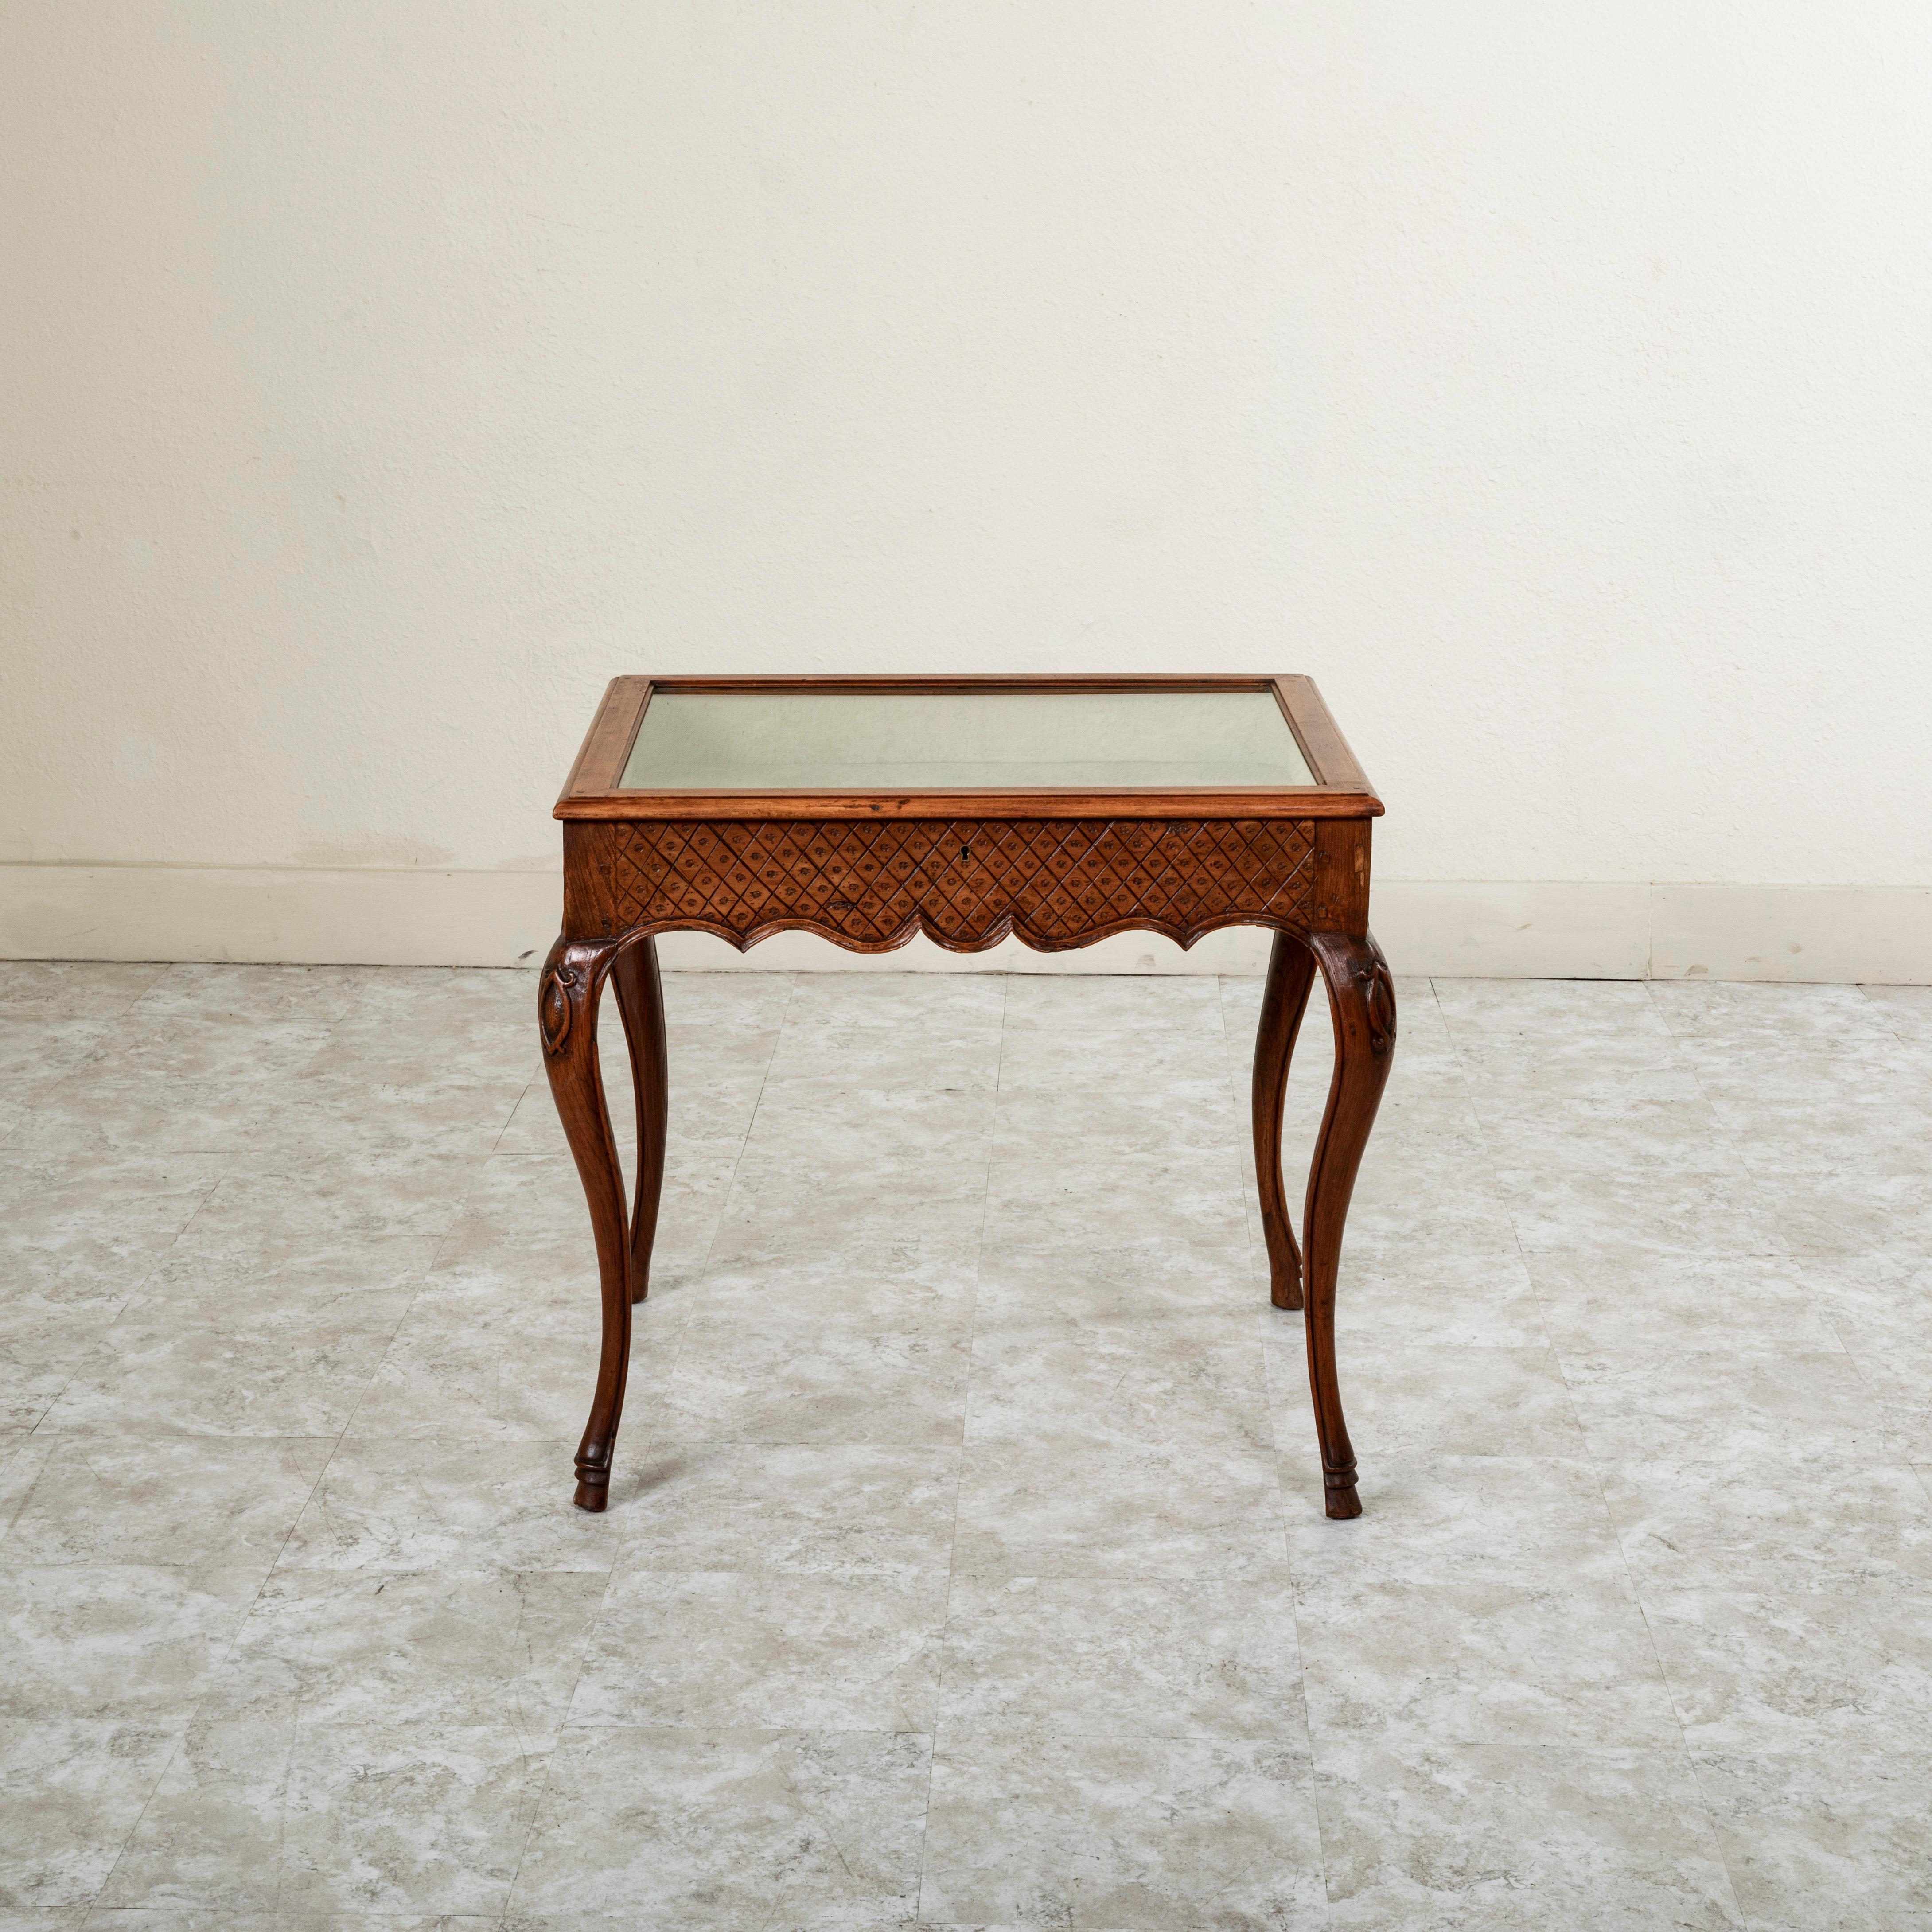 This late nineteenth century French Regency style hand pegged walnut display table features hand carved detailing of a diamond pattern on all sides. The hinged glass top opens for access to its fabric lined interior. The table rests on classic